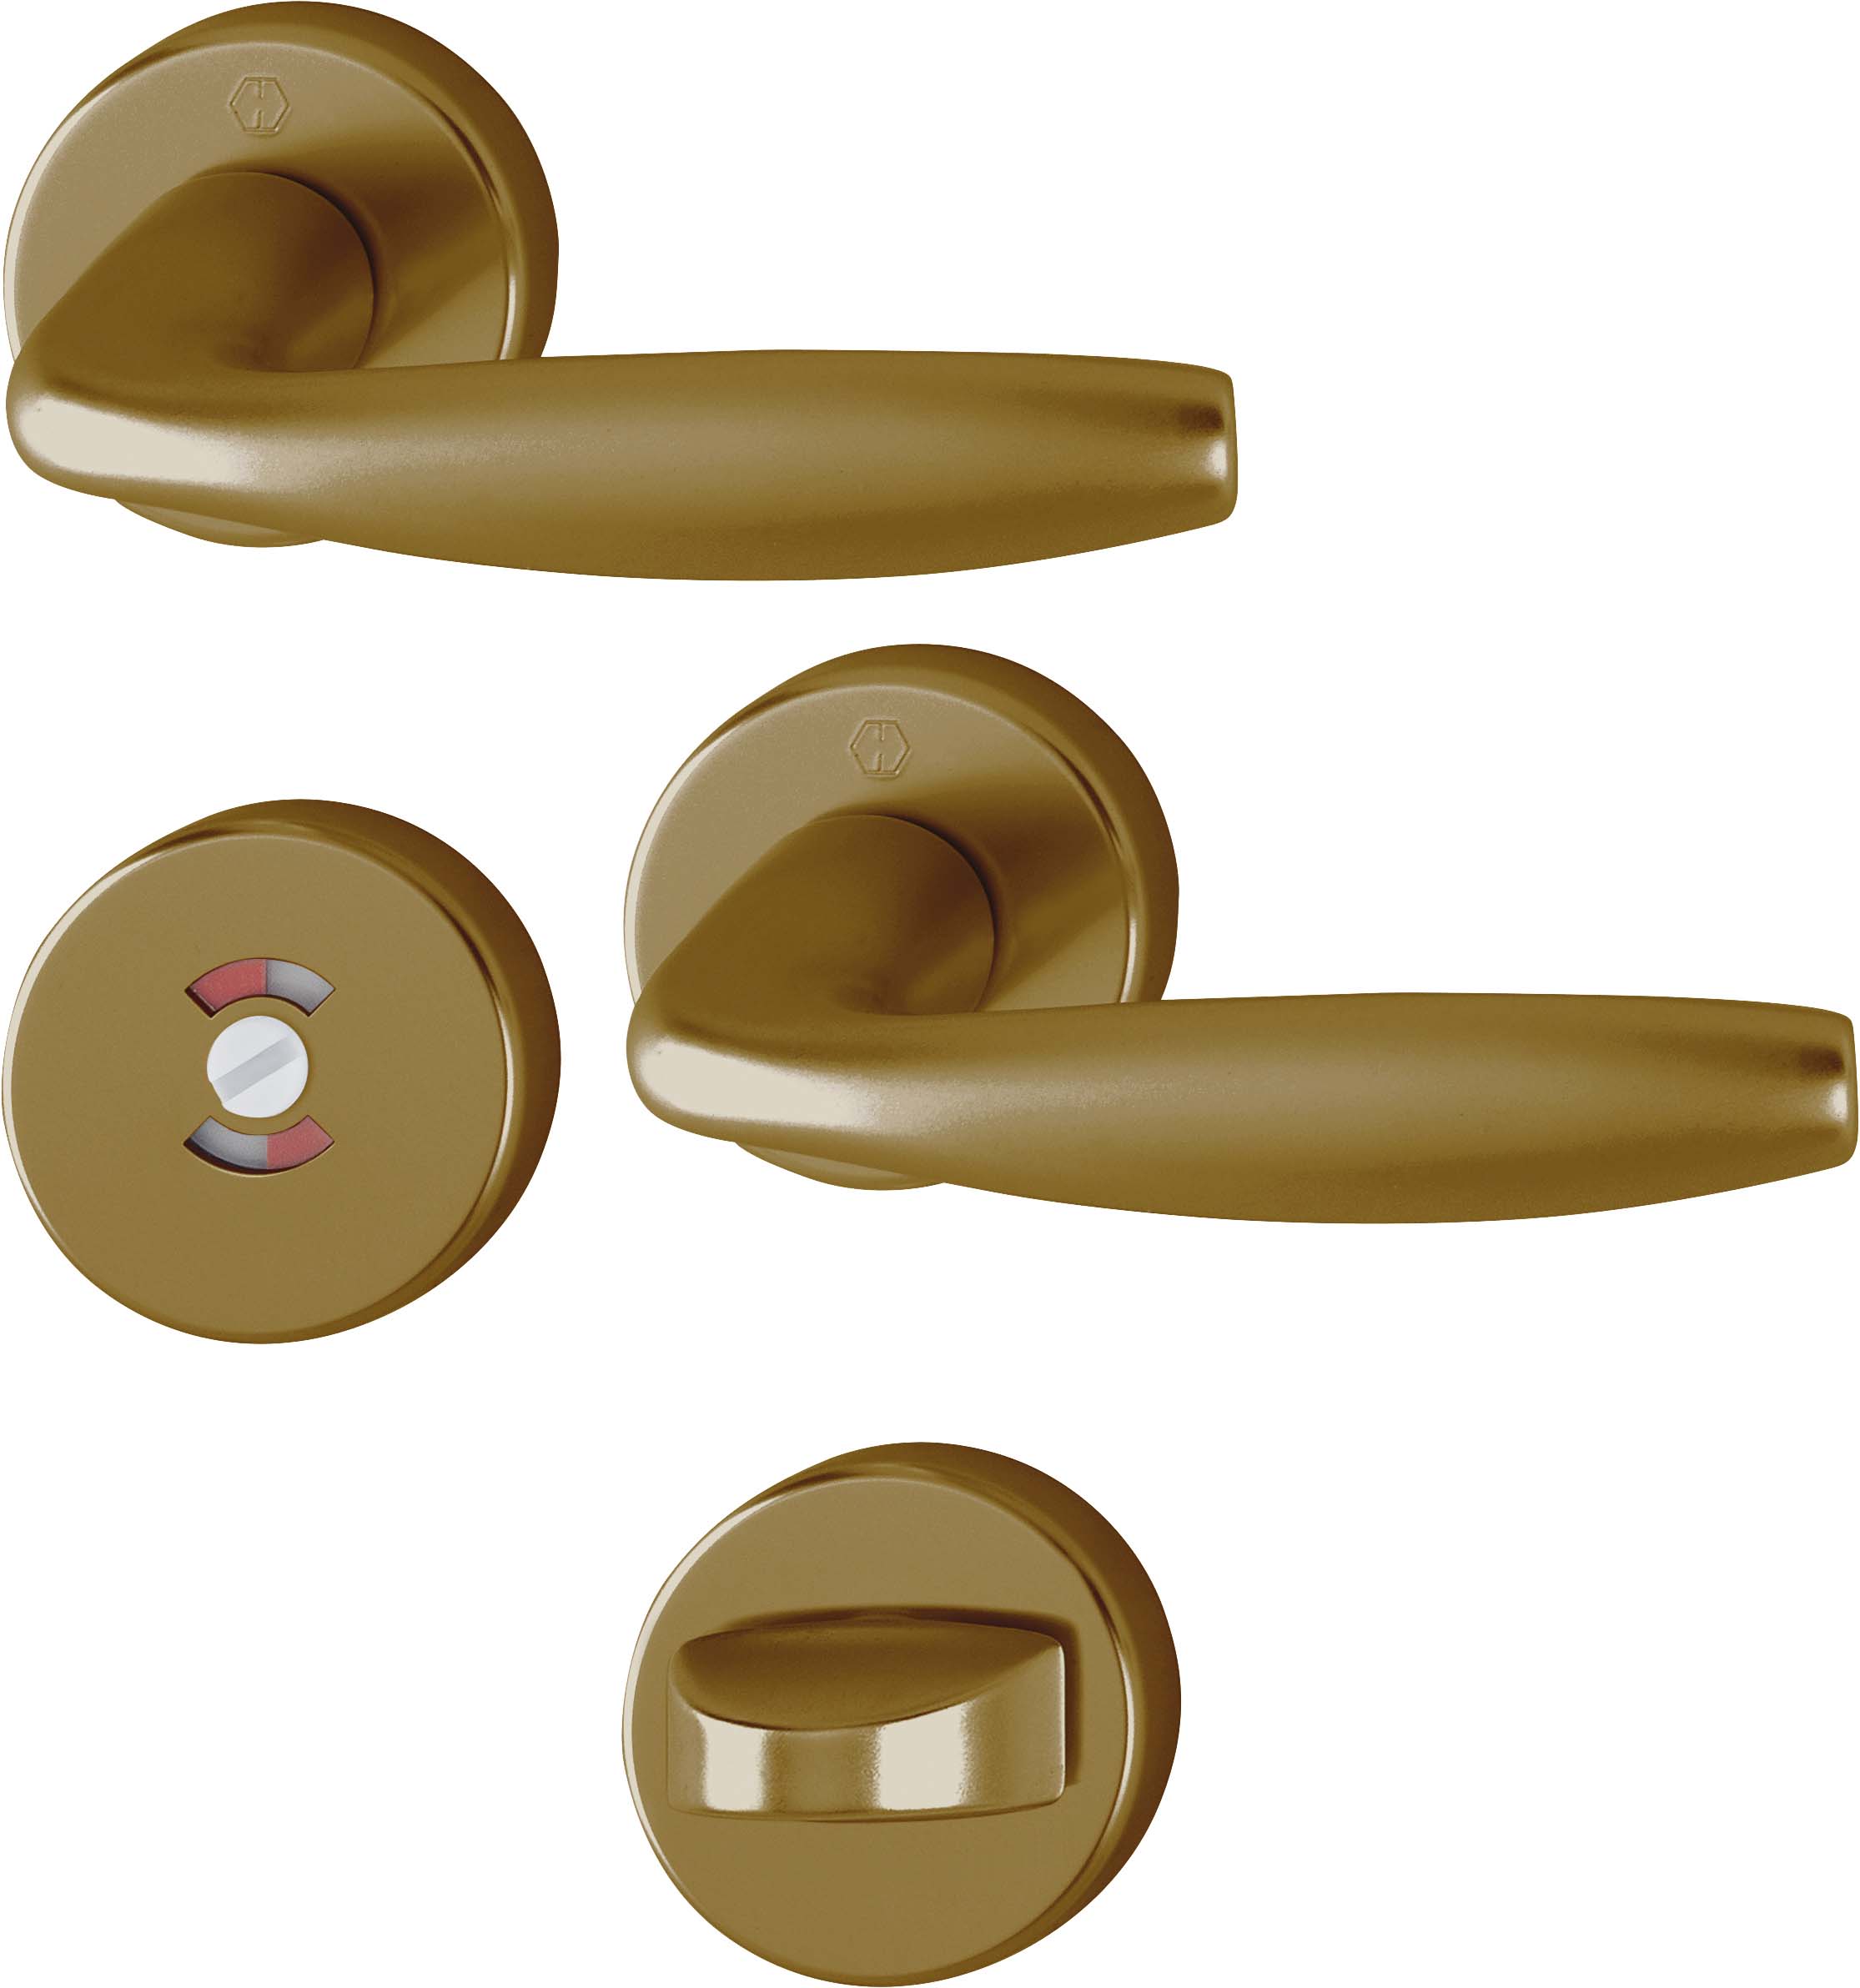 Handle-New-York-bronze-nuance-with-wc-lock